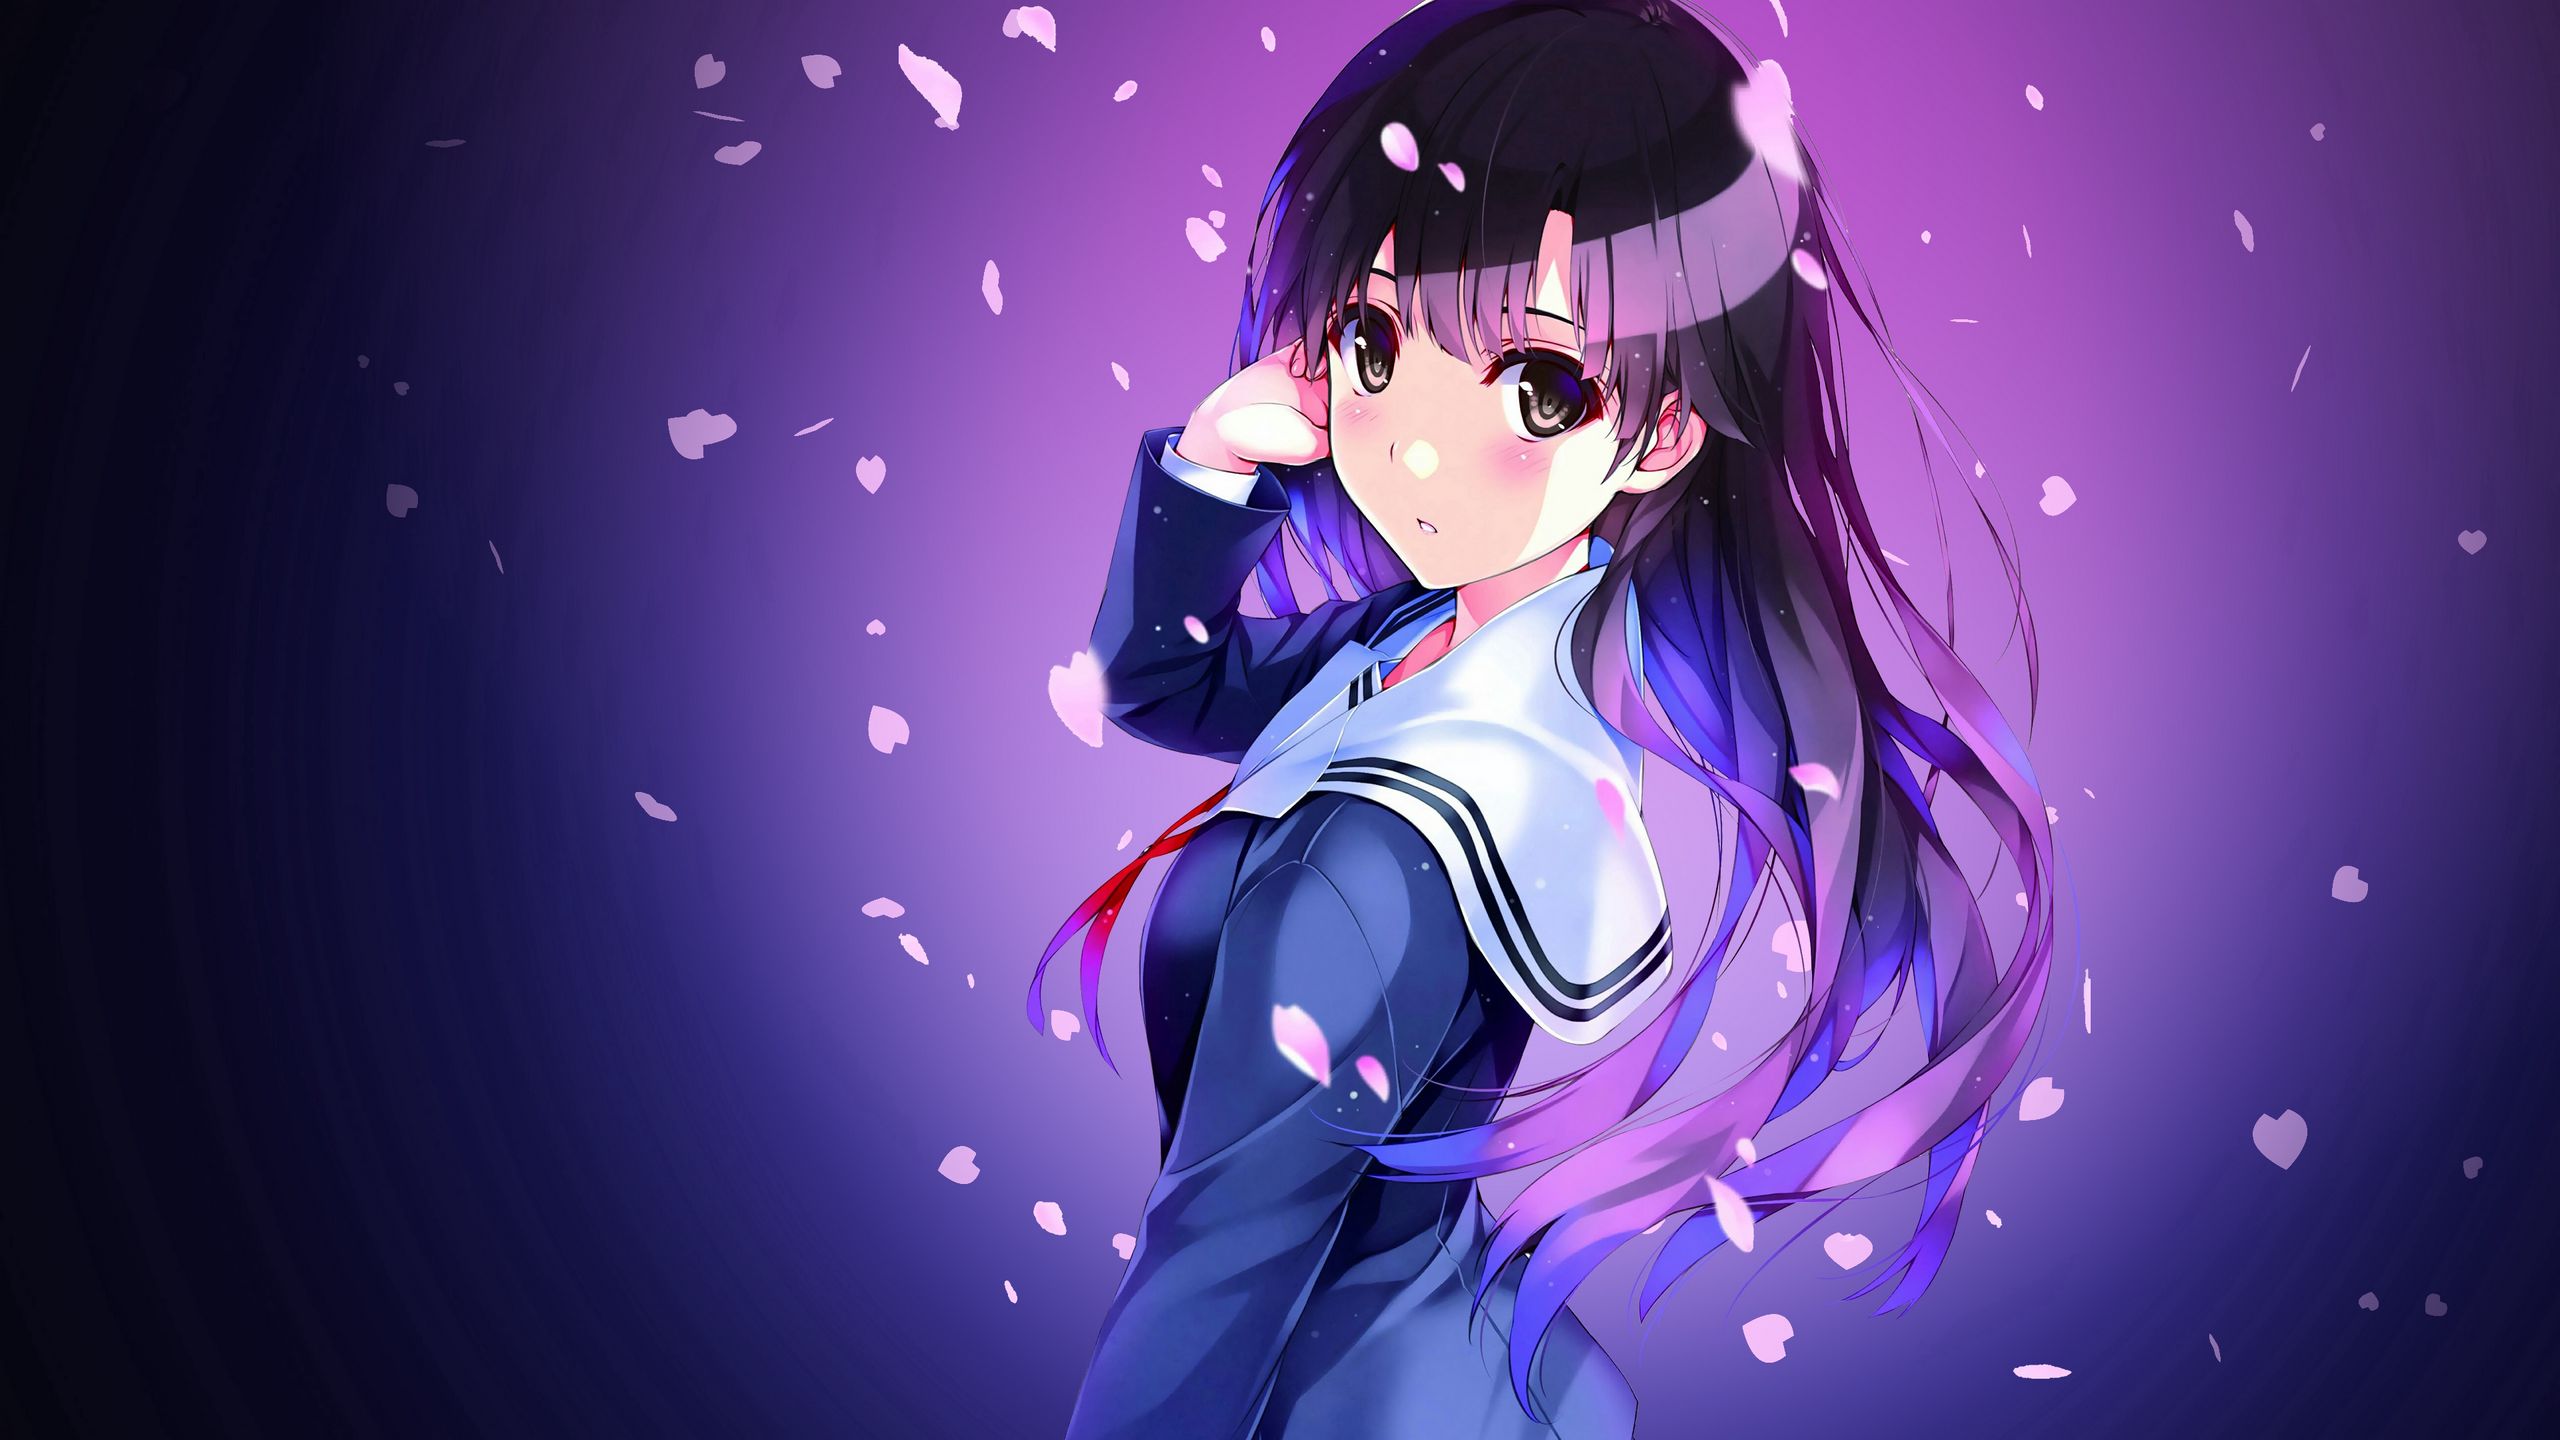 Anime 2560x1440 Wallpapers - Wallpaper Cave